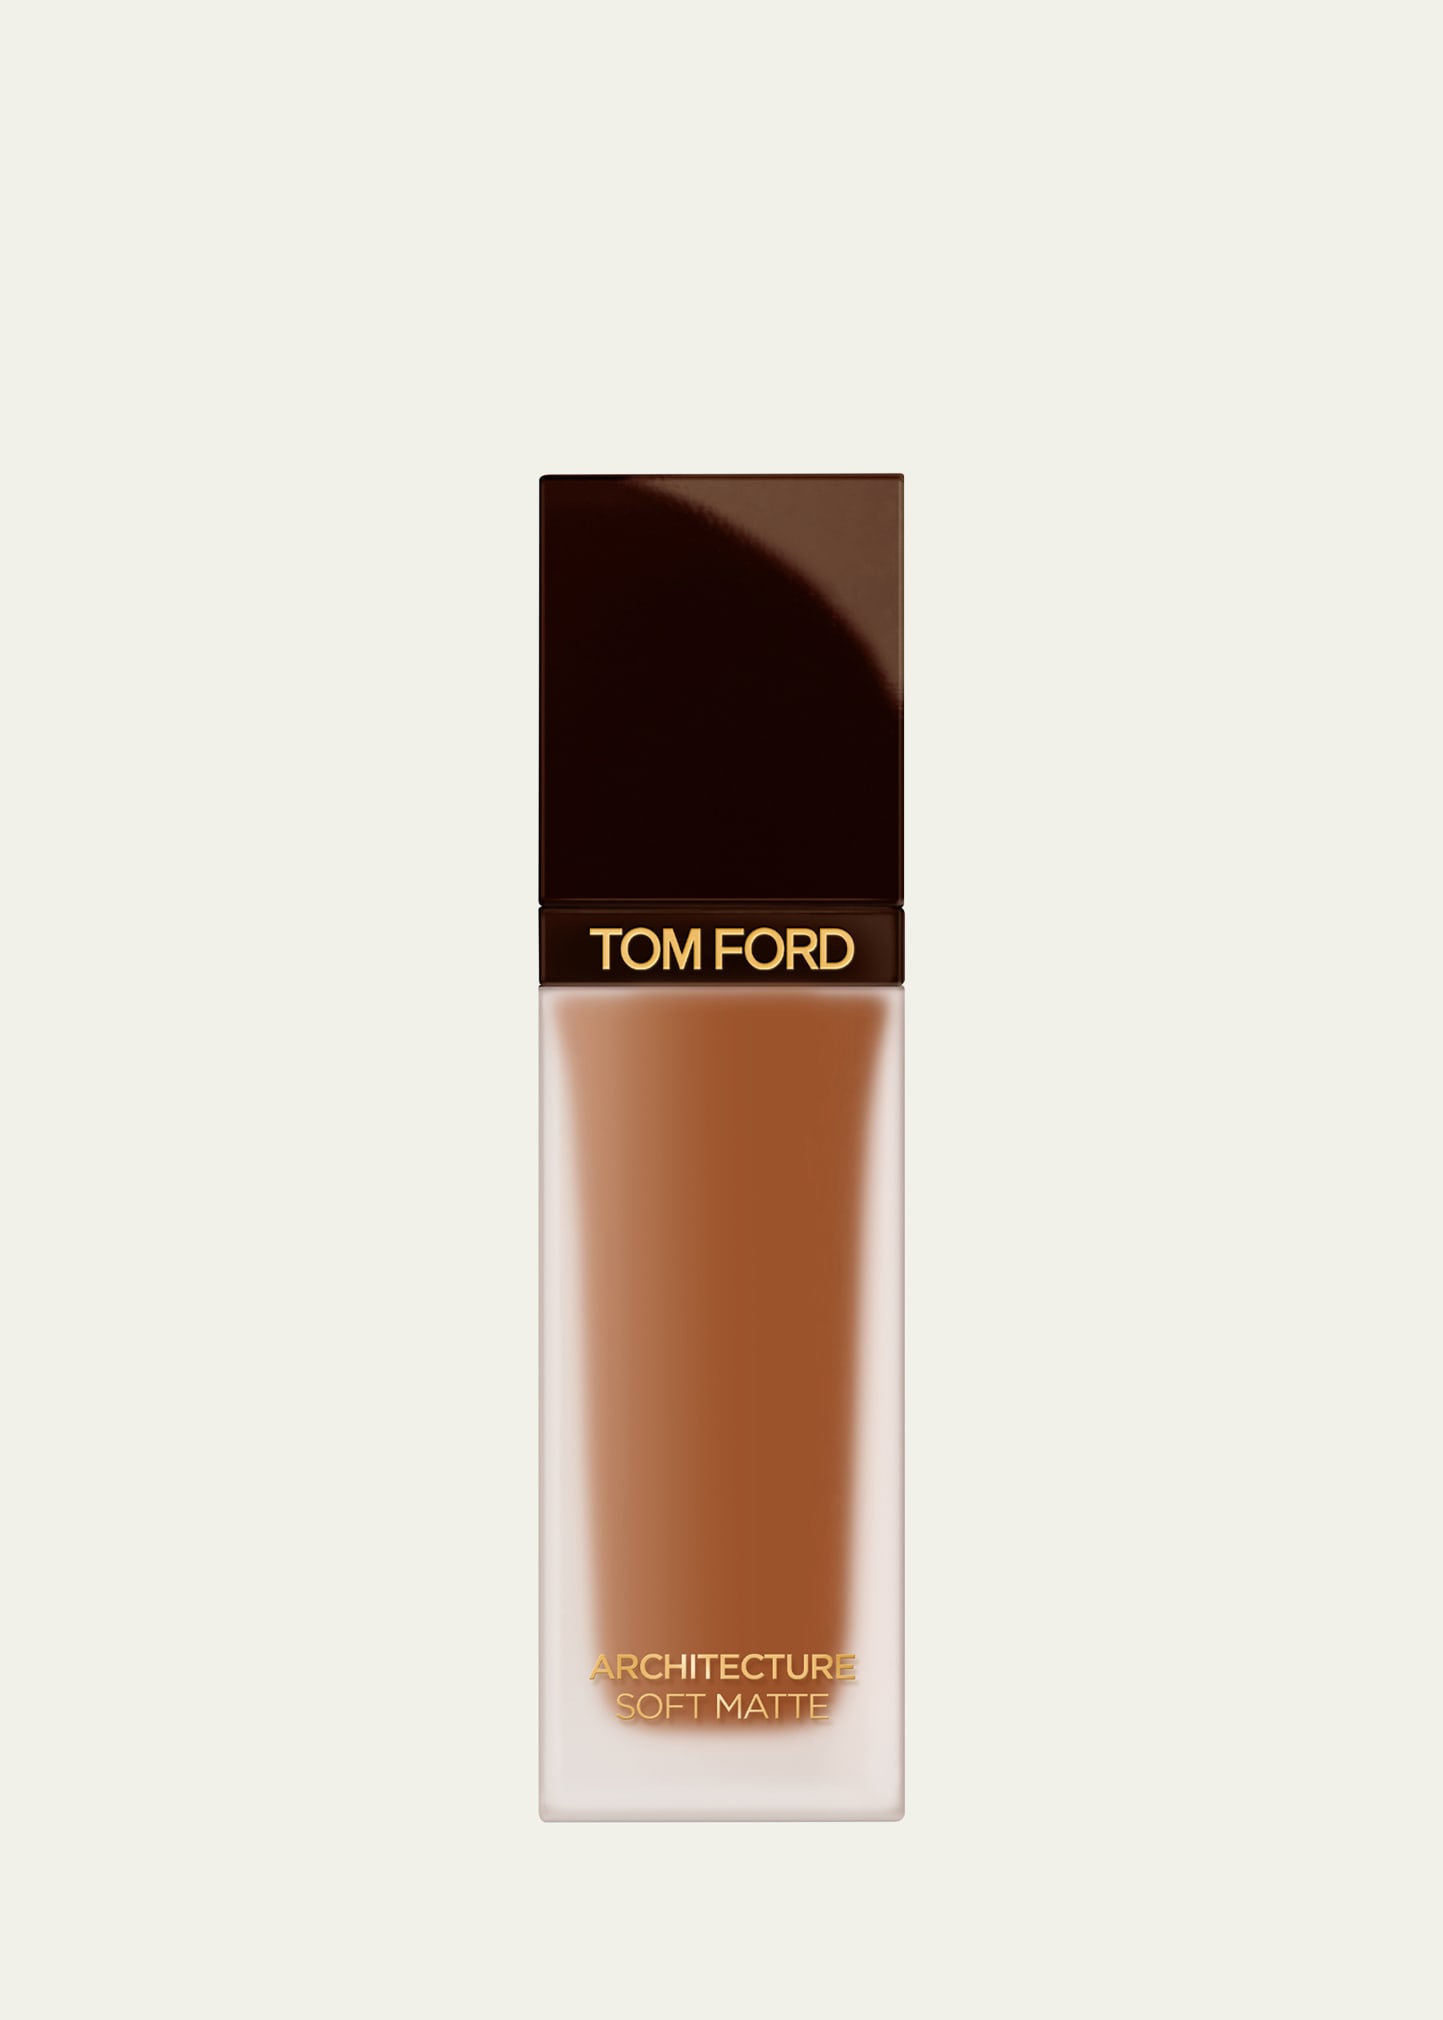 Tom Ford Architecture Soft Matte Foundation In Asm - 9.7 Cool Du